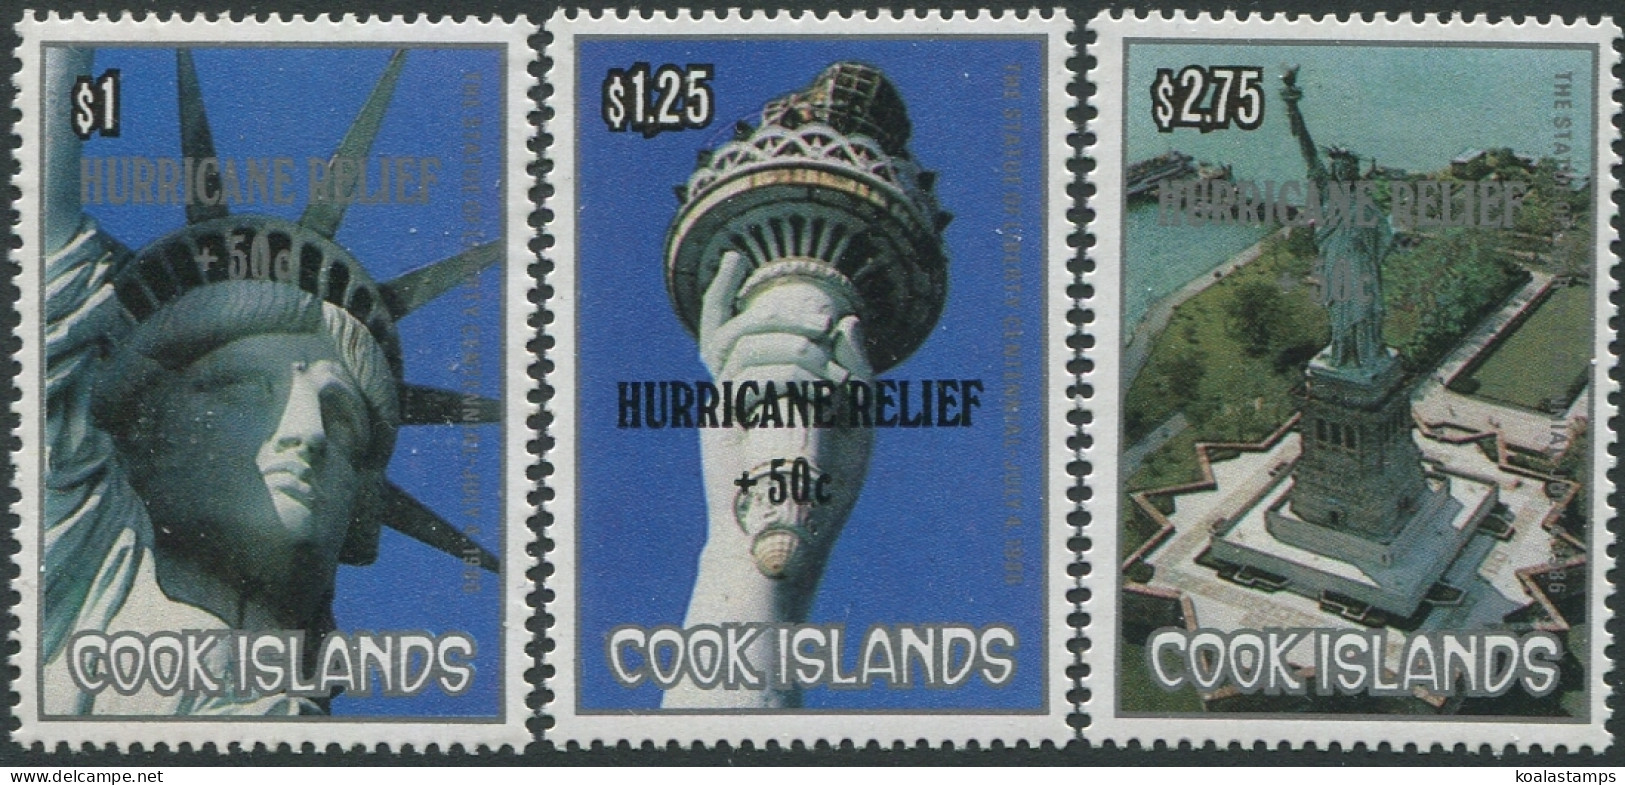 Cook Islands 1986 SG1175-1177 Statue Of Liberty HURRICANE RELIEF +50c Set MNH - Cookinseln